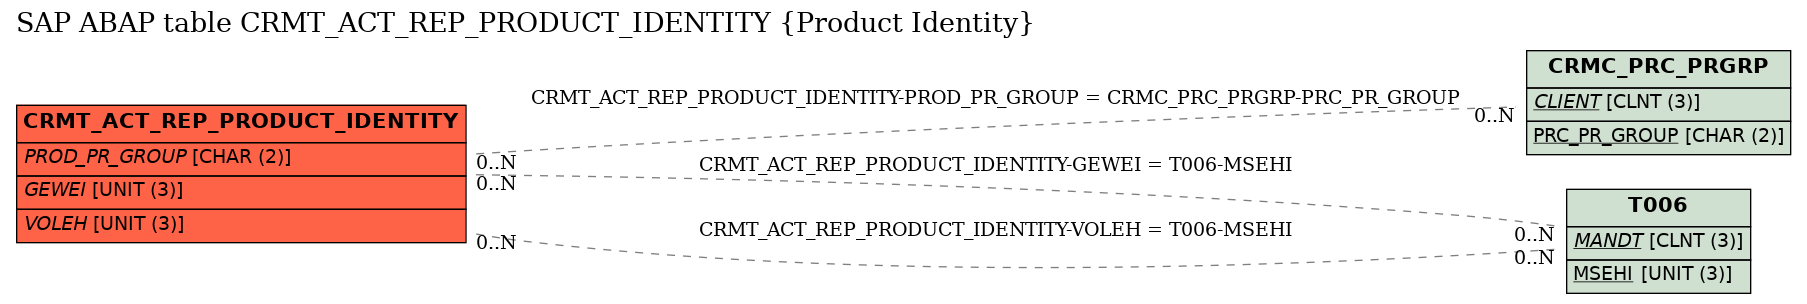 E-R Diagram for table CRMT_ACT_REP_PRODUCT_IDENTITY (Product Identity)